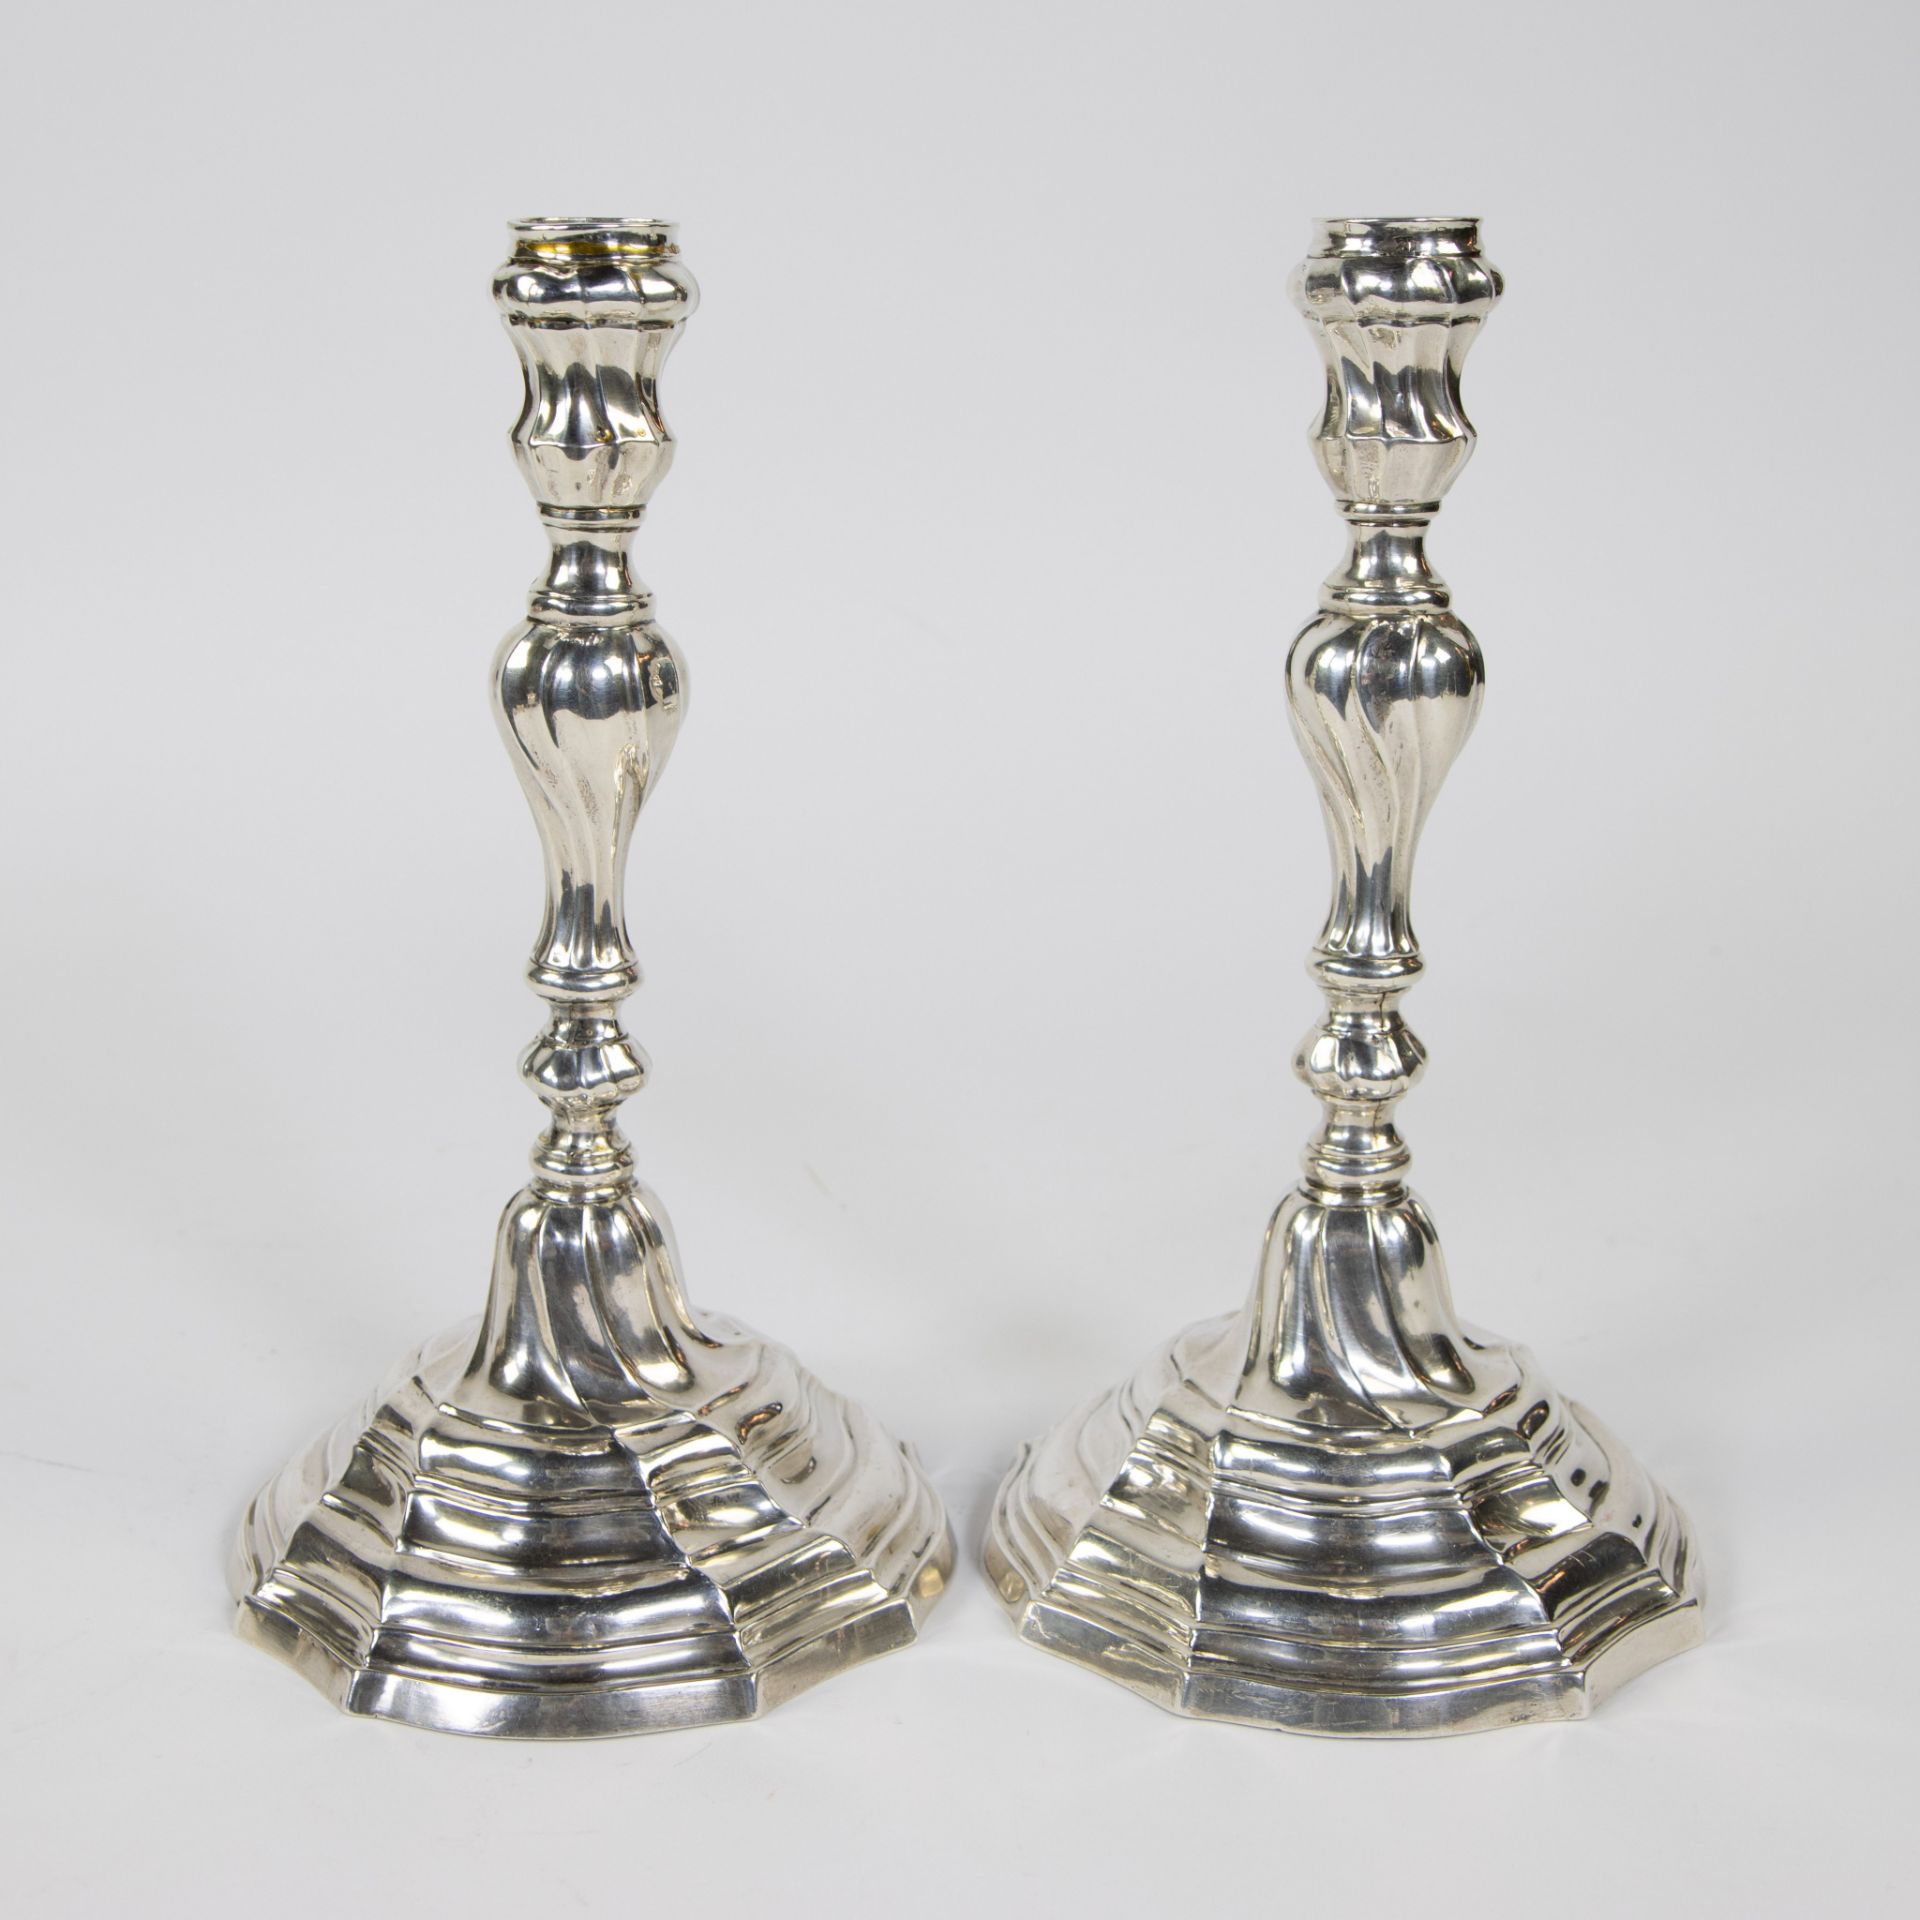 Ghent Louis XV candlesticks, twisted, silver 1774, silversmith Joannes Baptista Paulus - Image 2 of 5